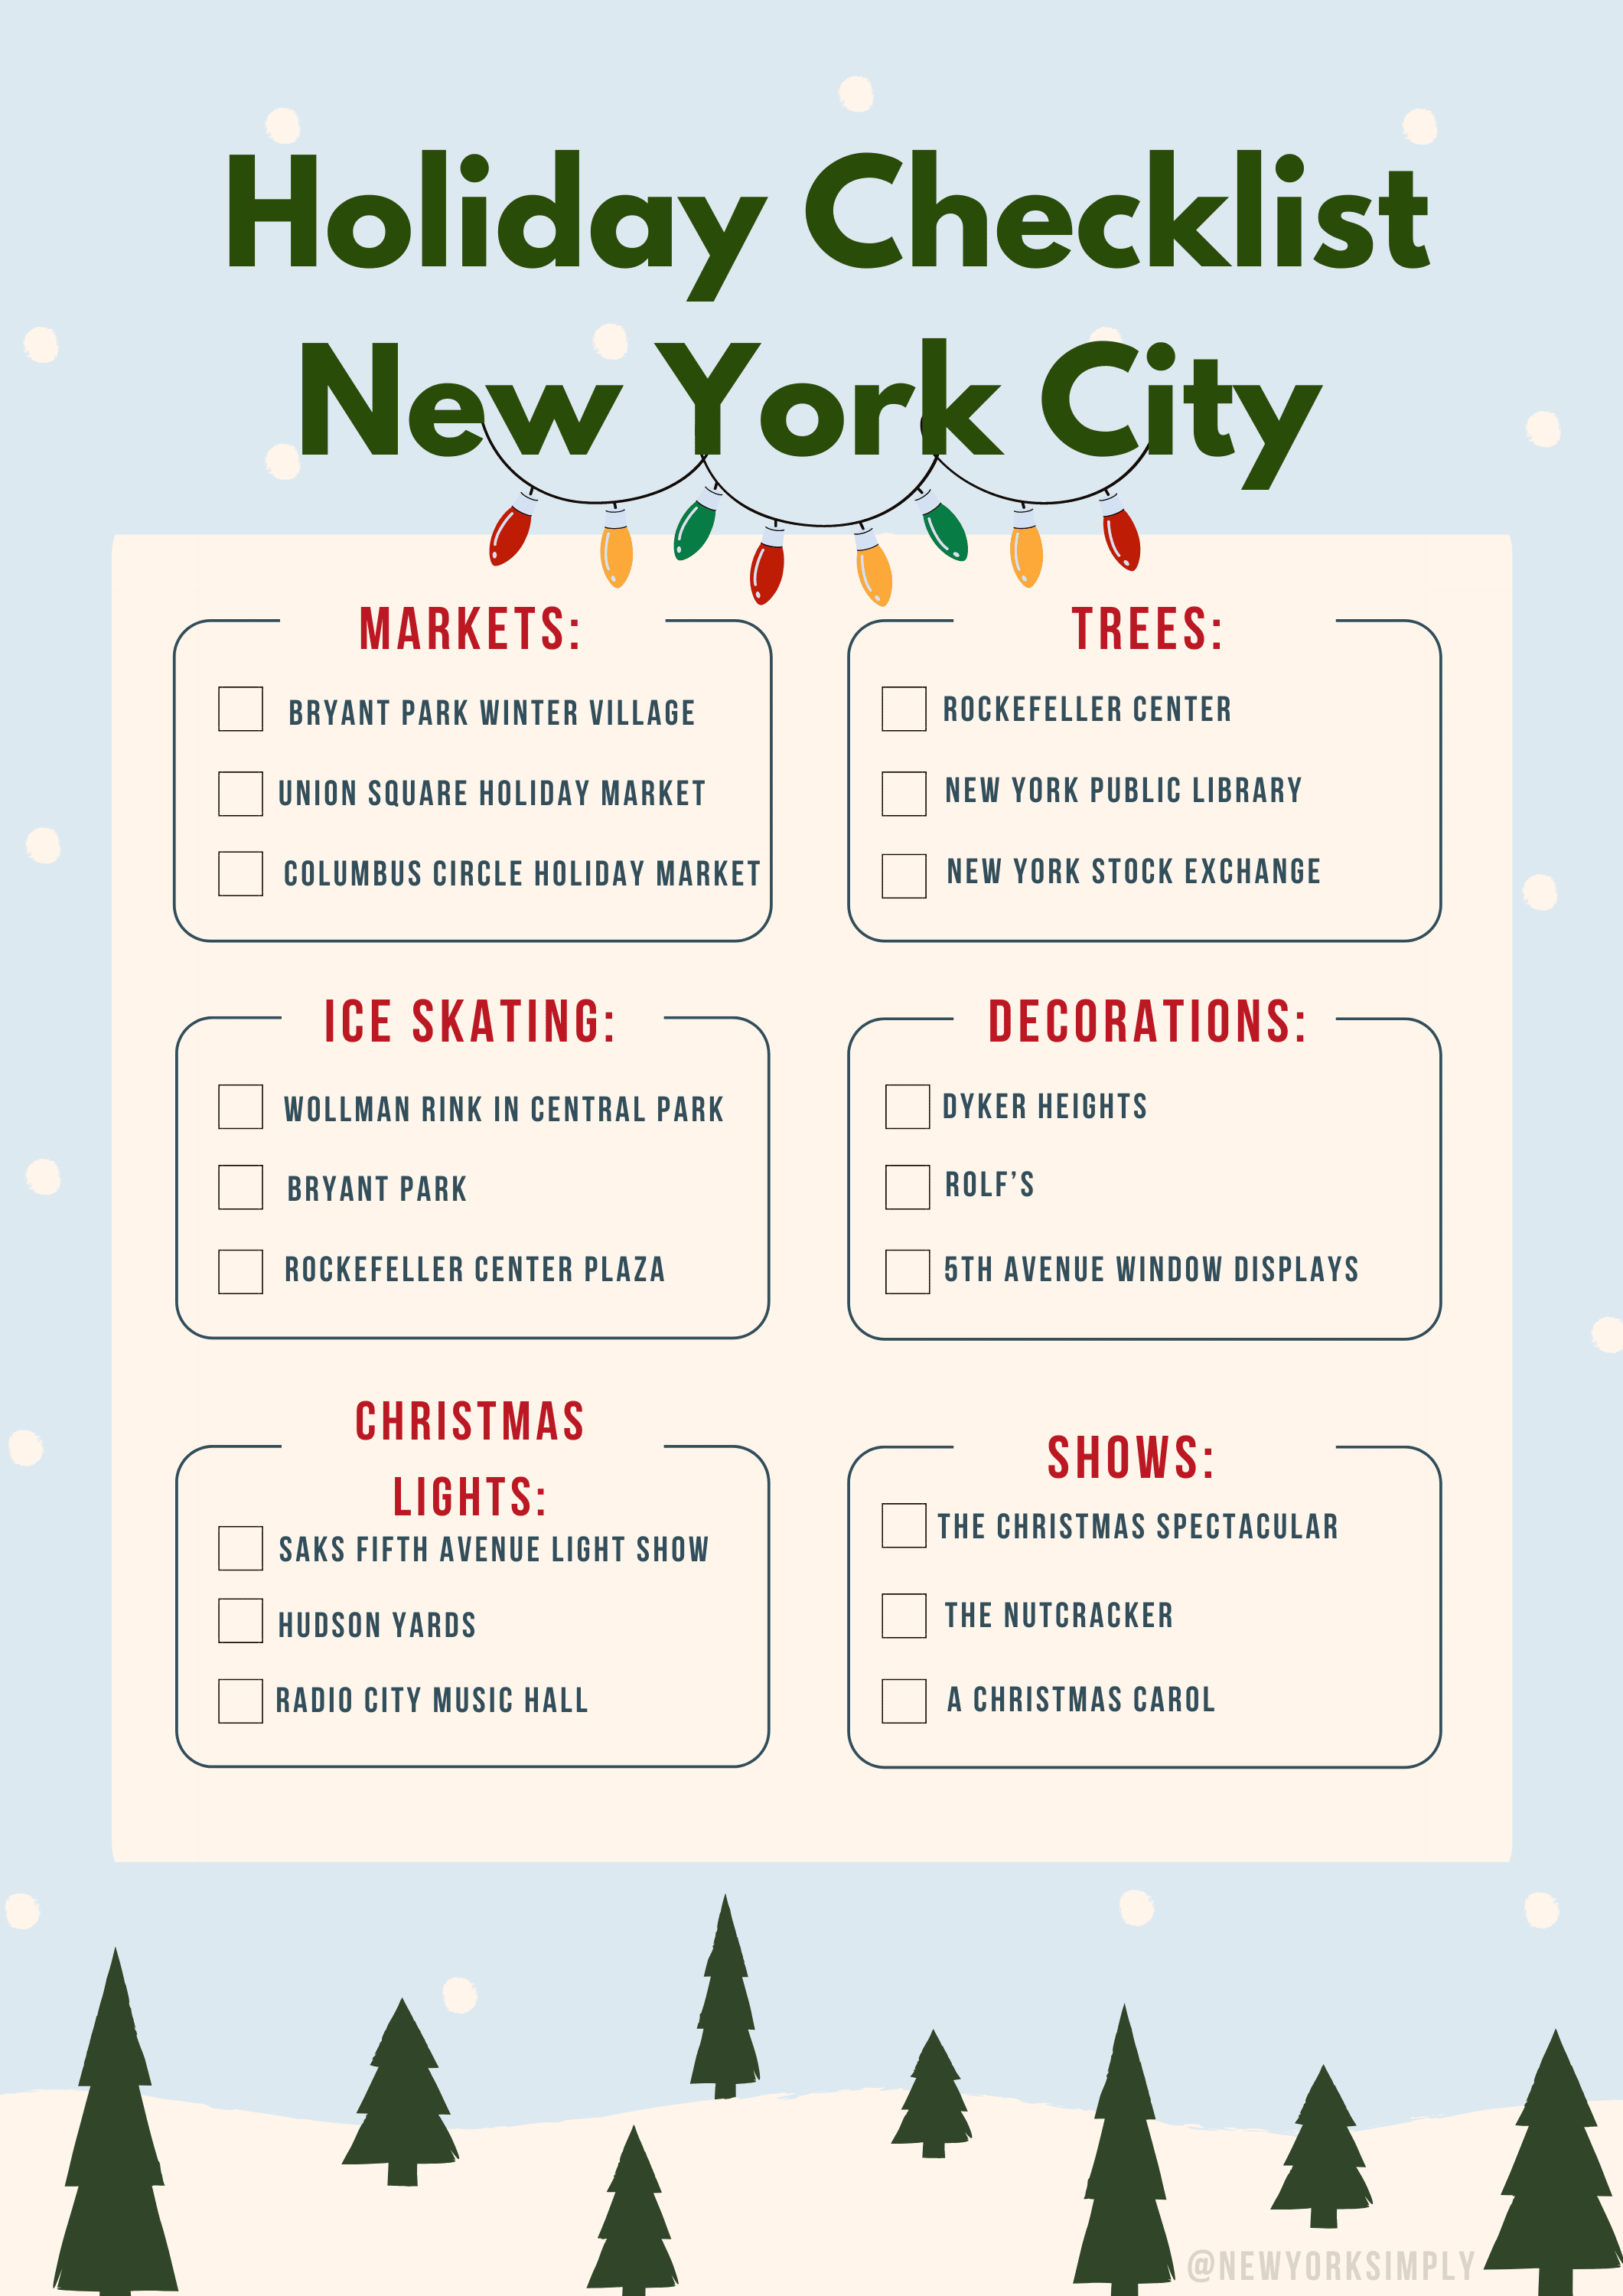 Holiday Checklist NYC
Downloadable bucket list
